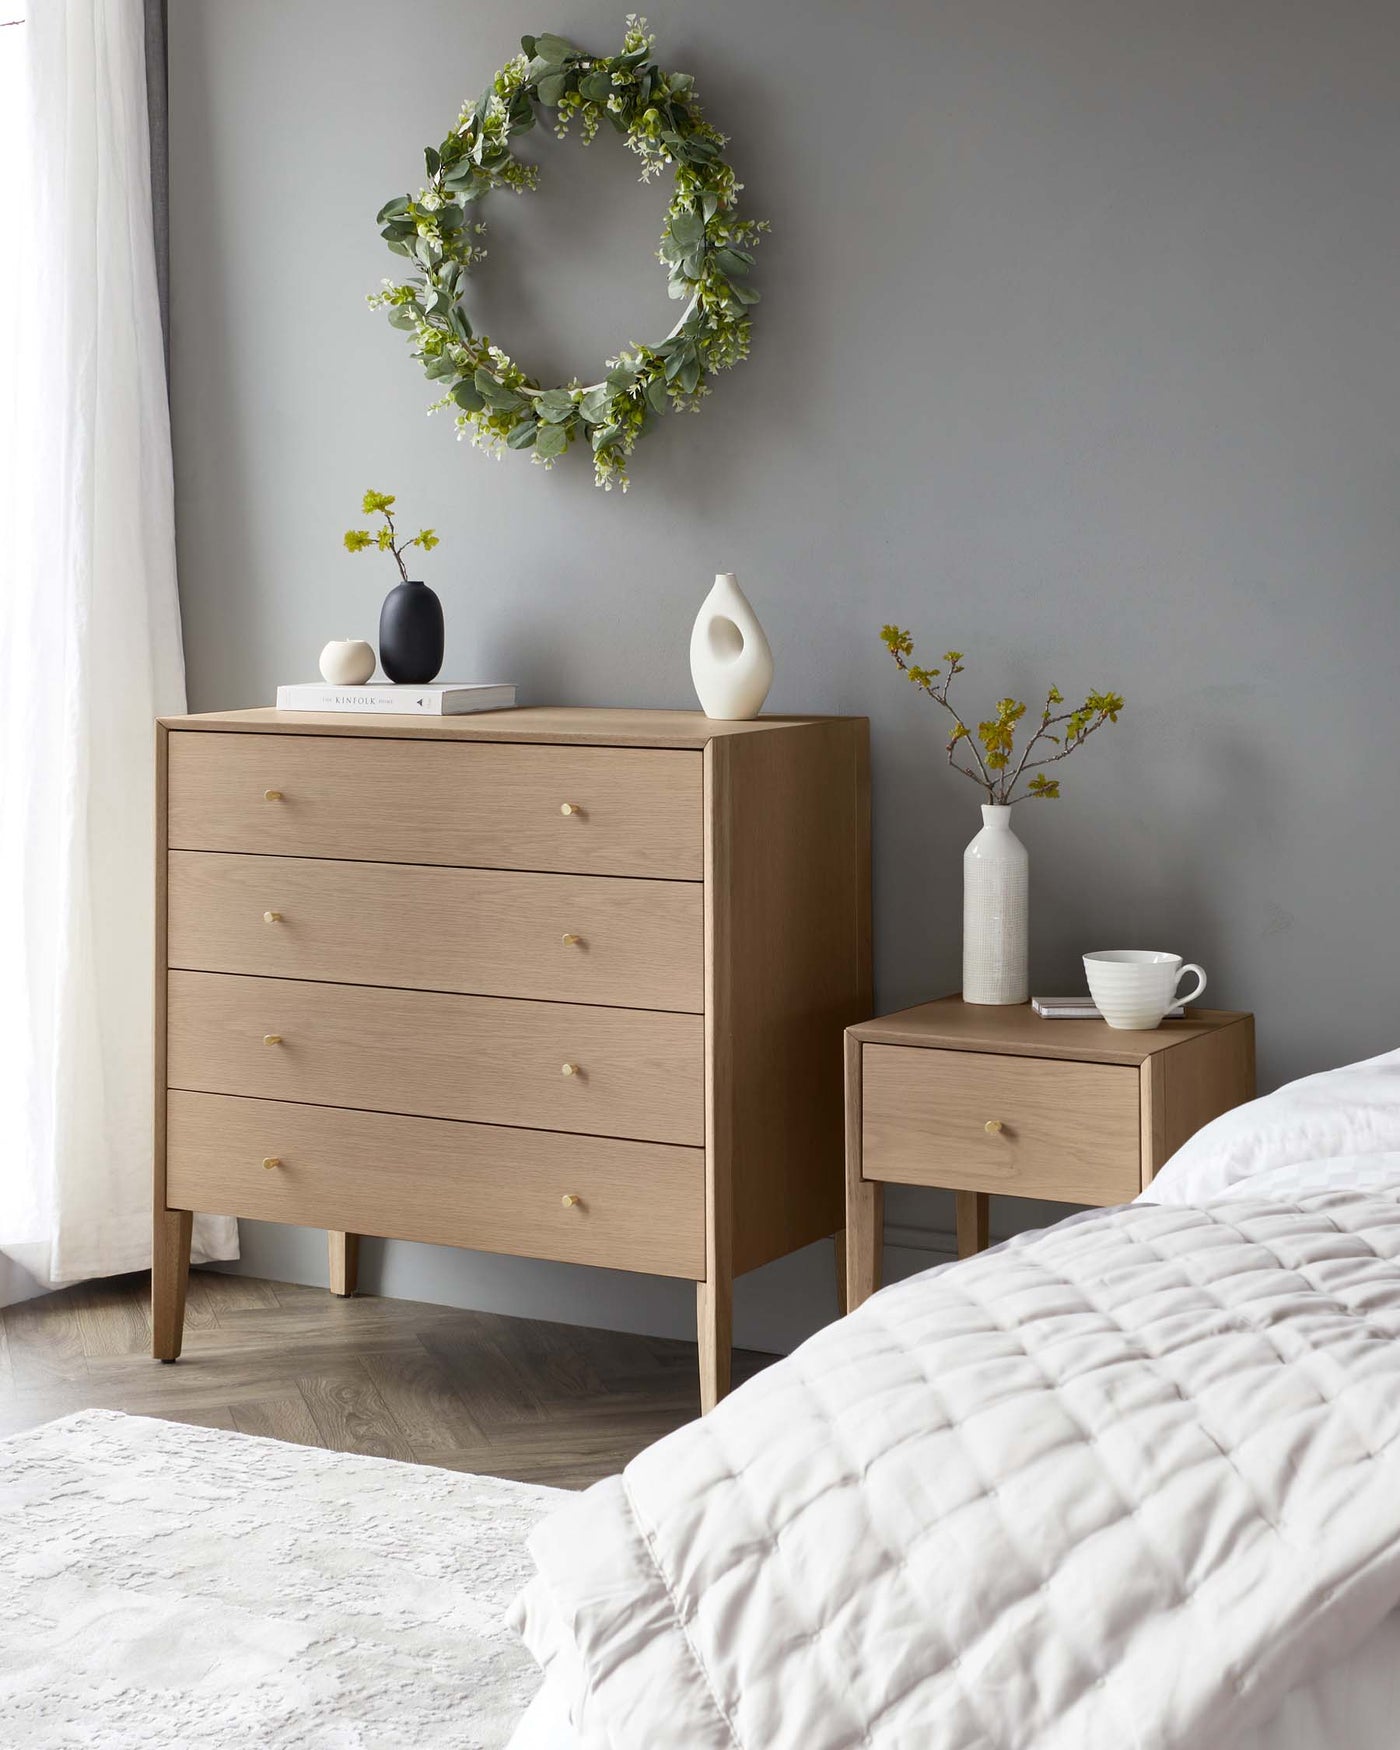 A modern wooden dresser with a four-drawer design featuring round knobs stands next to a matching single-drawer nightstand. Both pieces have a natural wood finish and tapered legs, creating a minimalist and contemporary look in the bedroom setting.